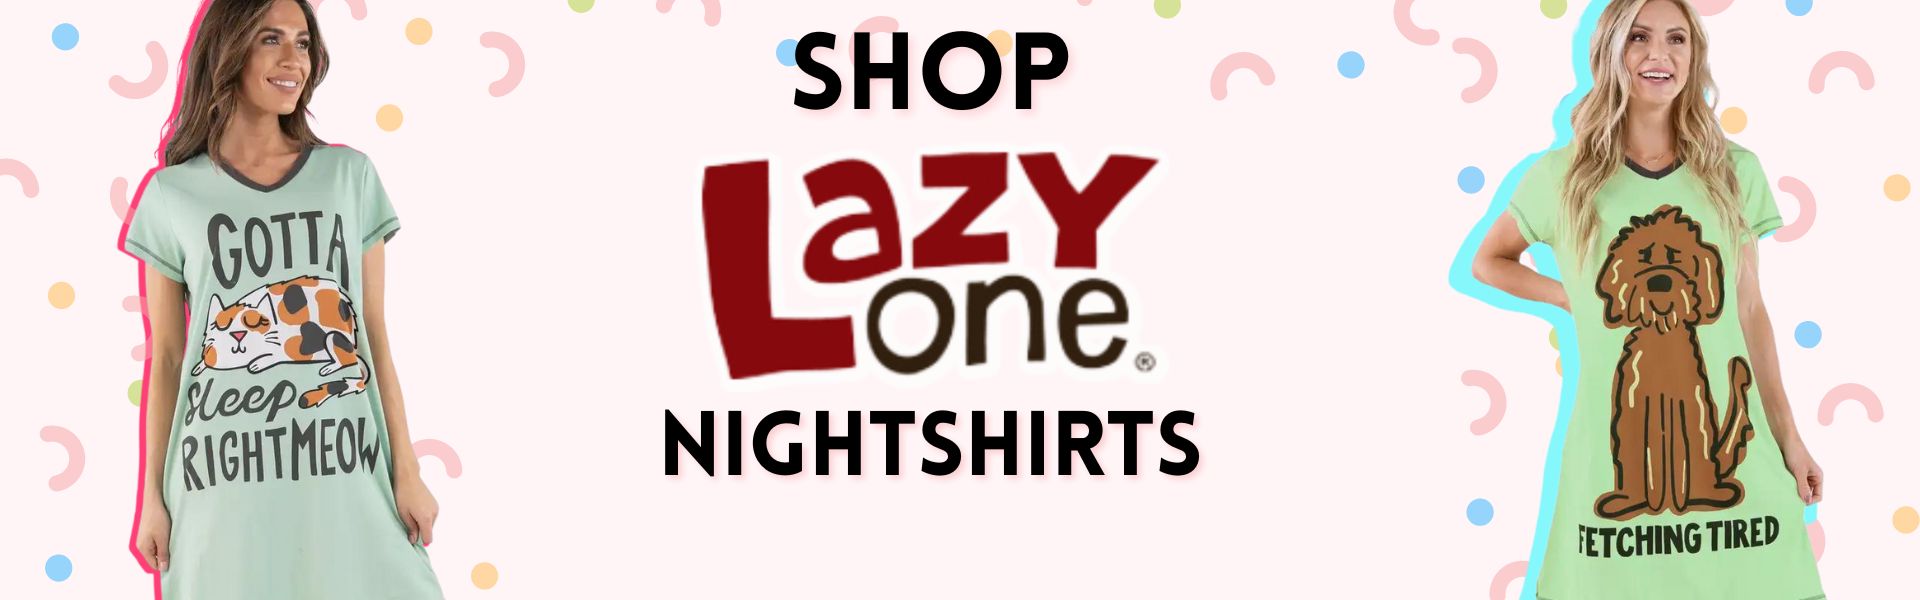 Shop our Lazy One Nightshirts for women and kids